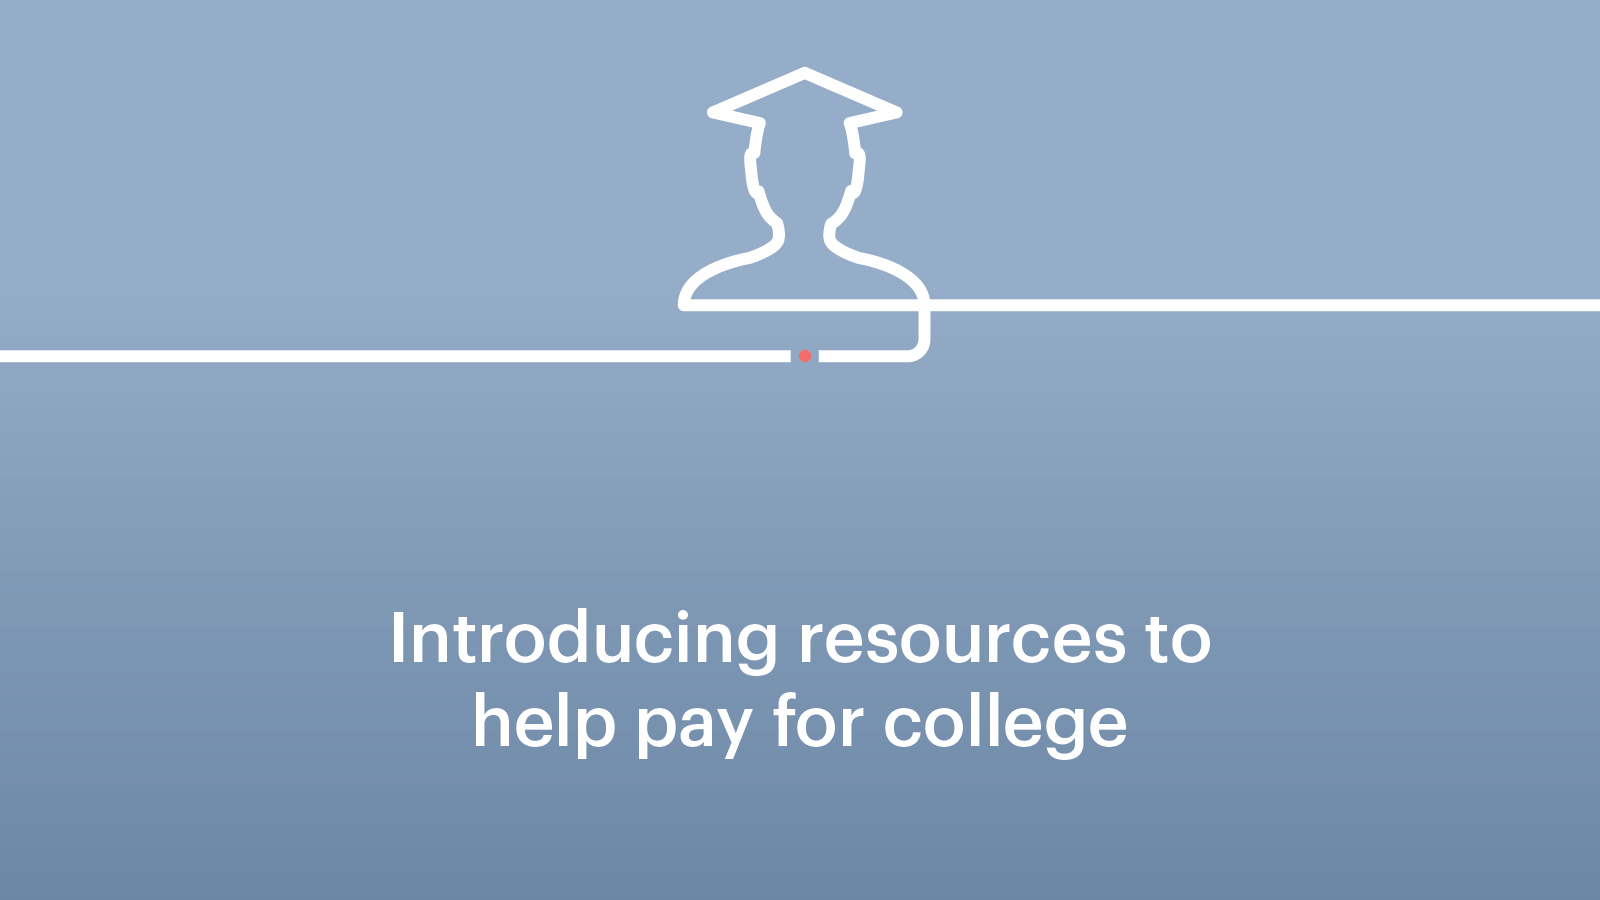 Introducing resources to help pay for college